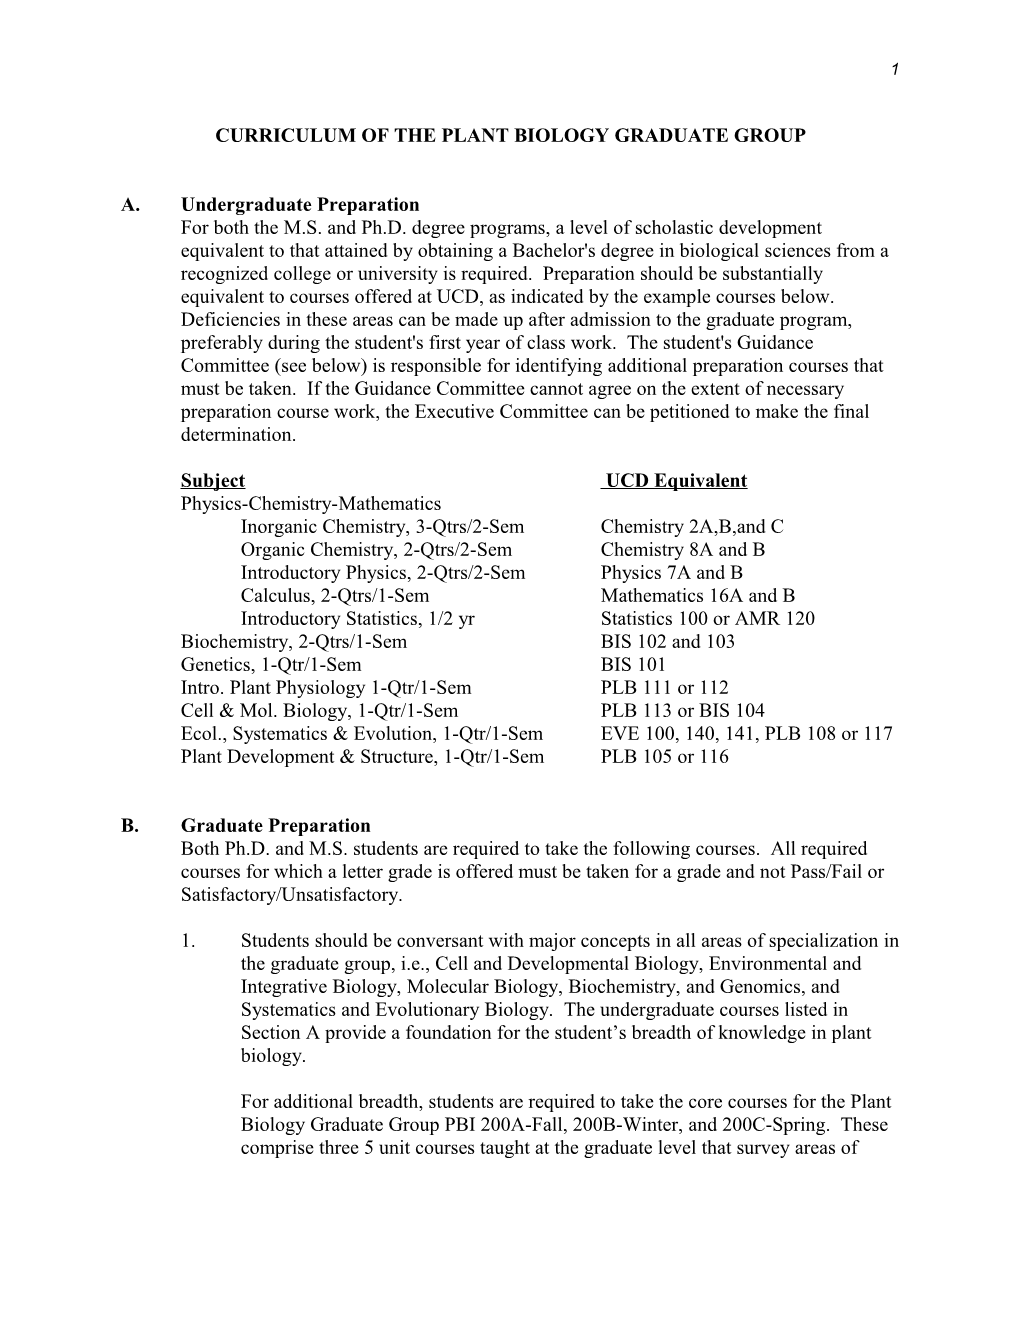 Curriculum of the Plant Biology Graduate Group